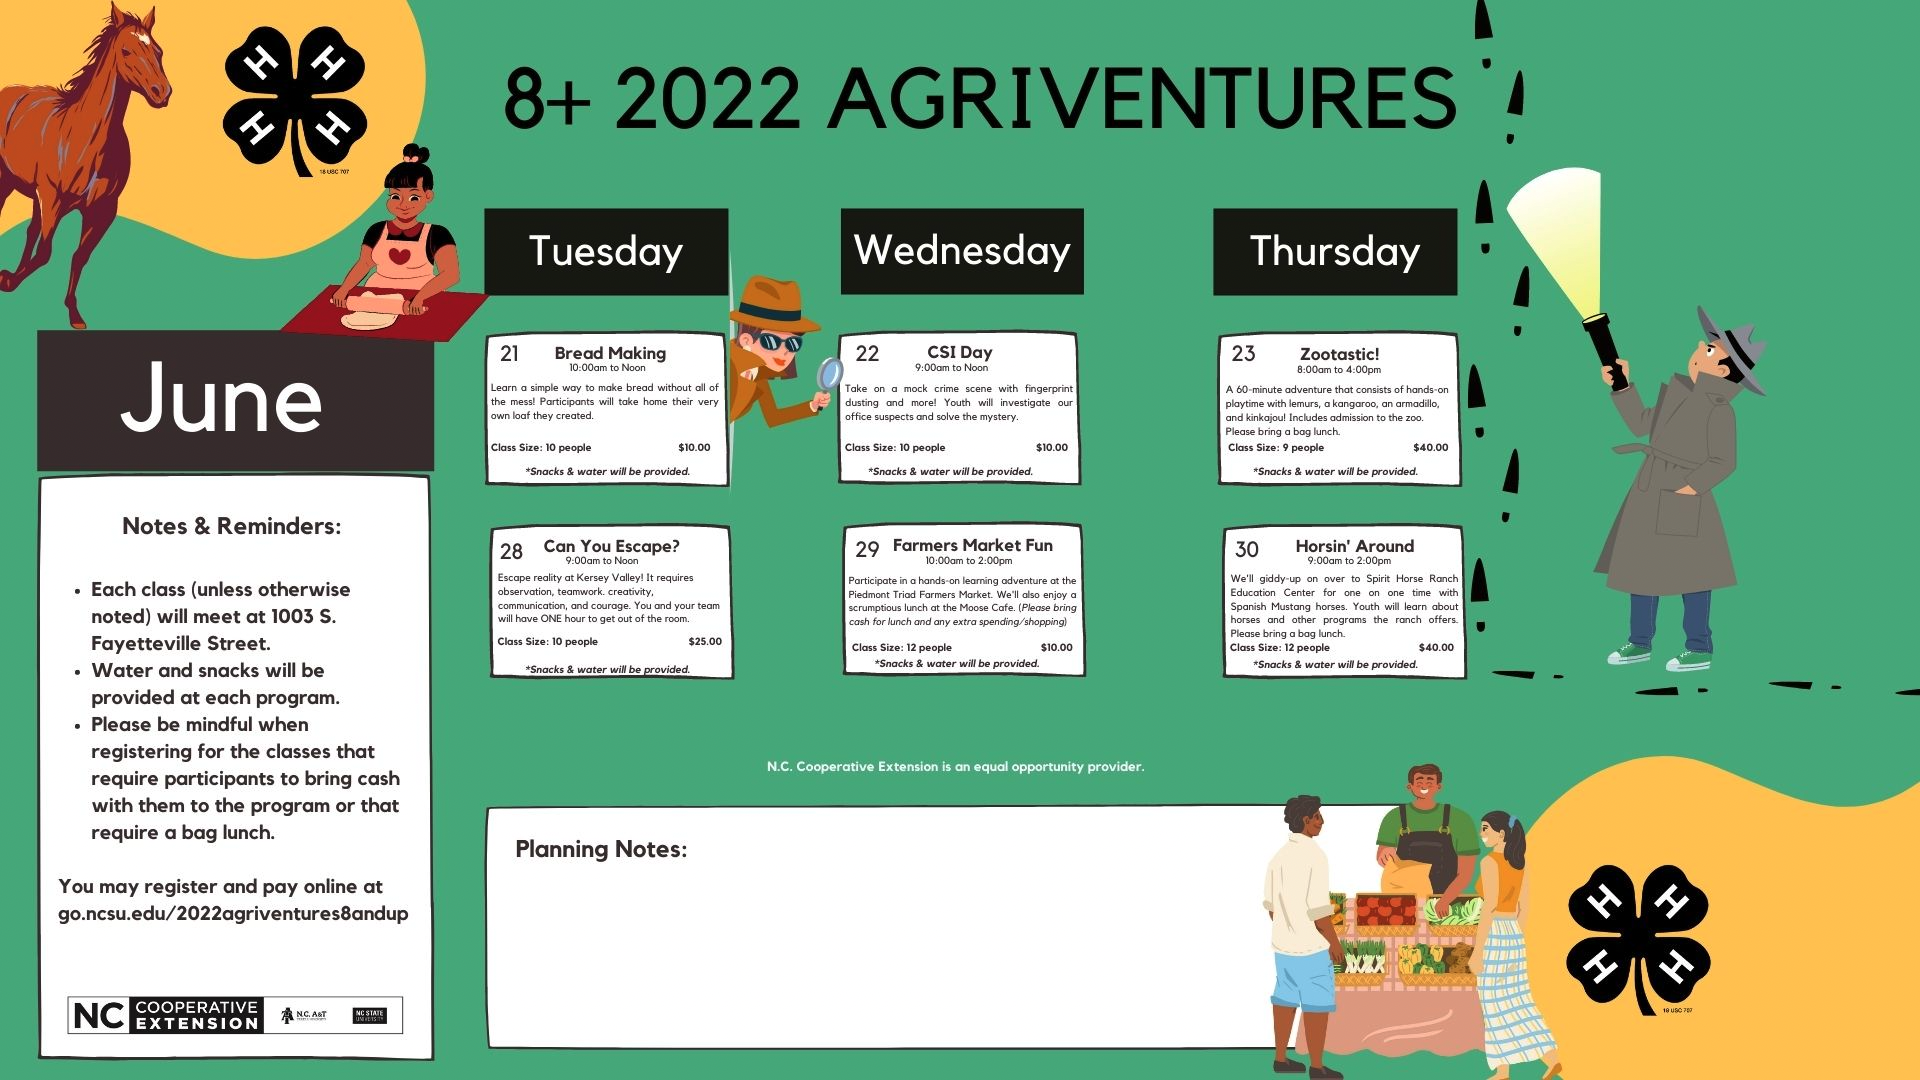 June 2022 Agriventures class calendar for 8+ year olds